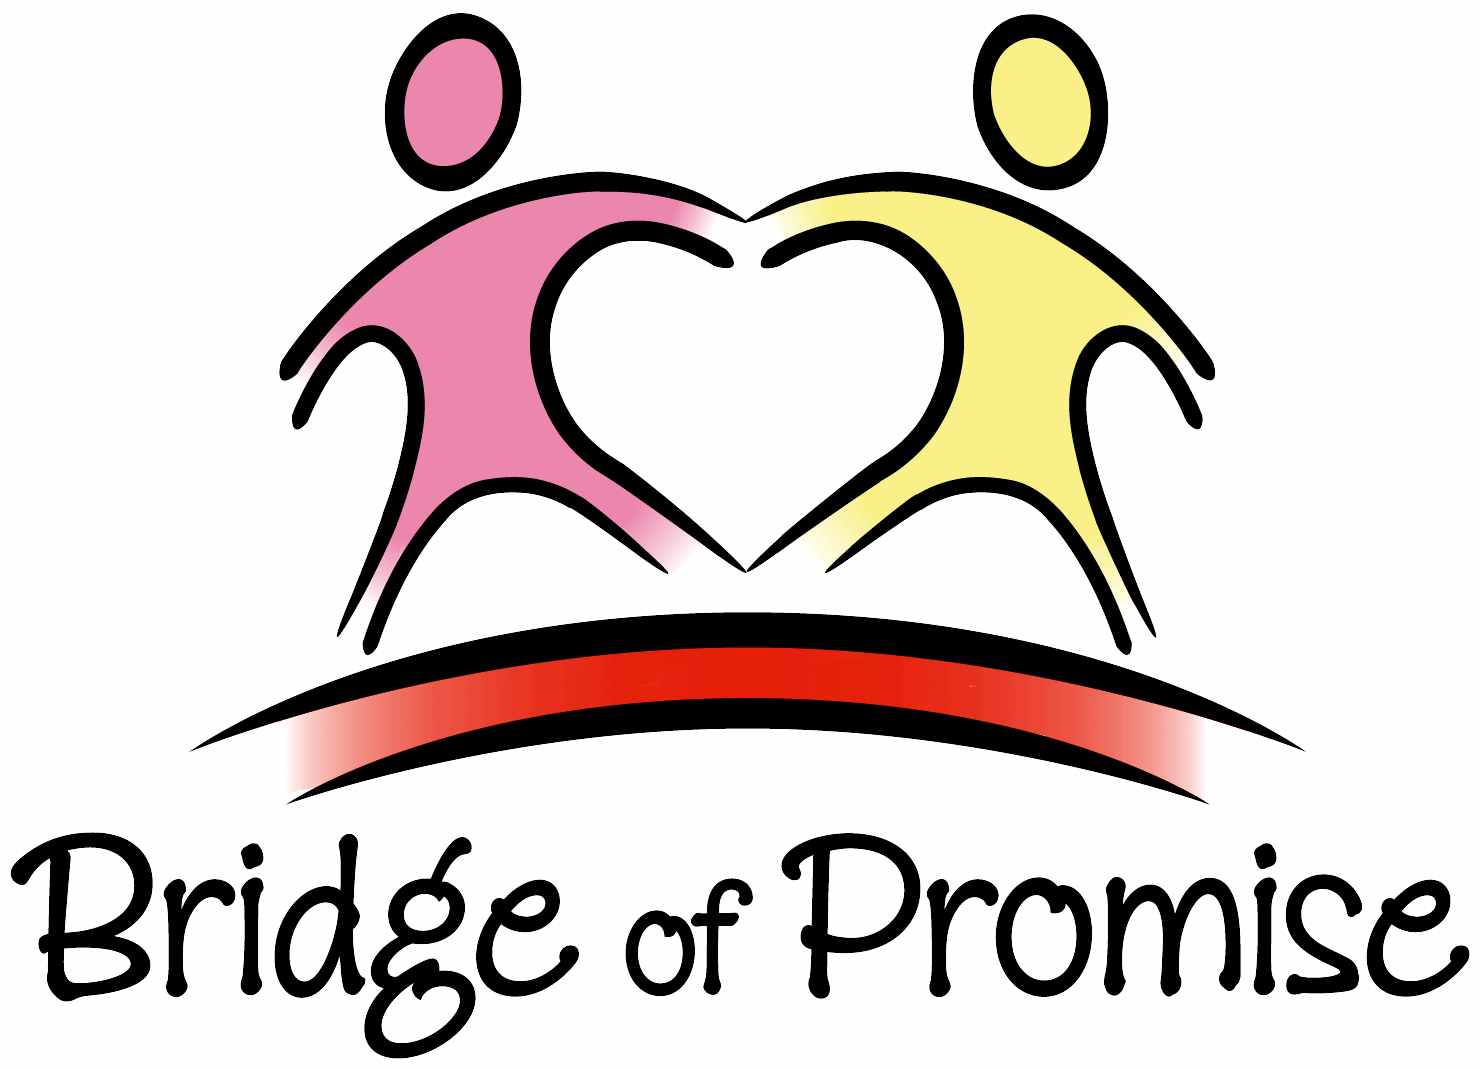 Bridge of Promise to provide adults with disabilities access to art activities.